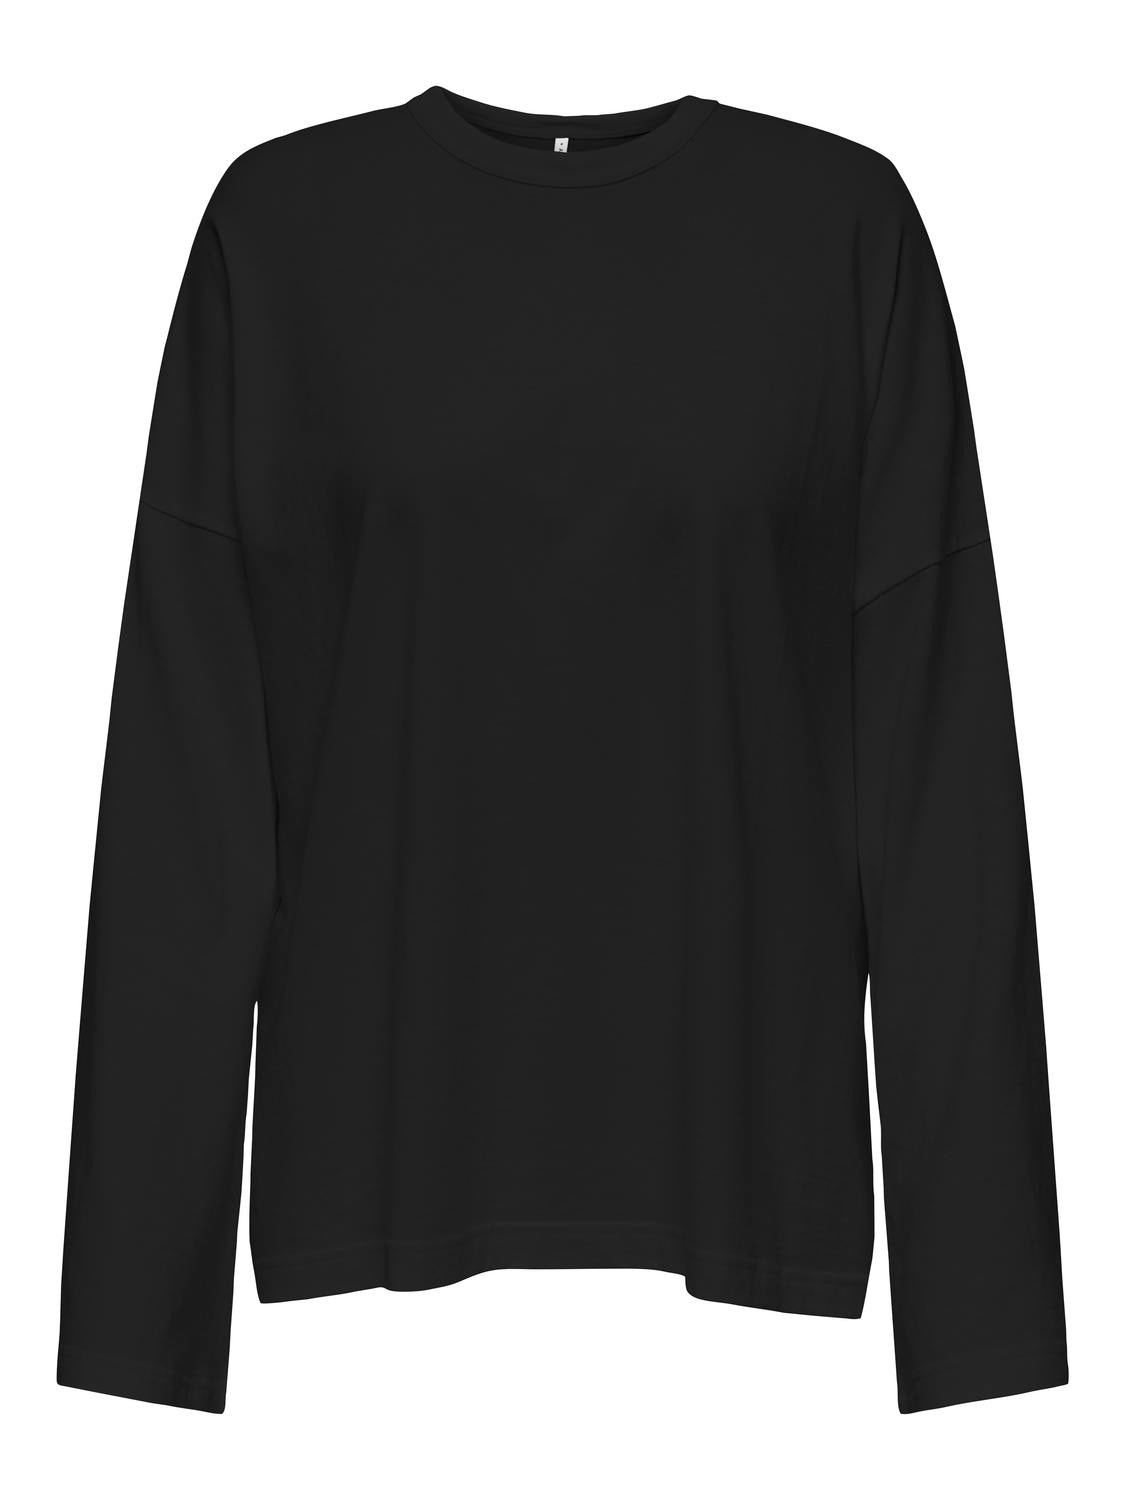 ONLY Solid colored o-neck top -Black - 15321733